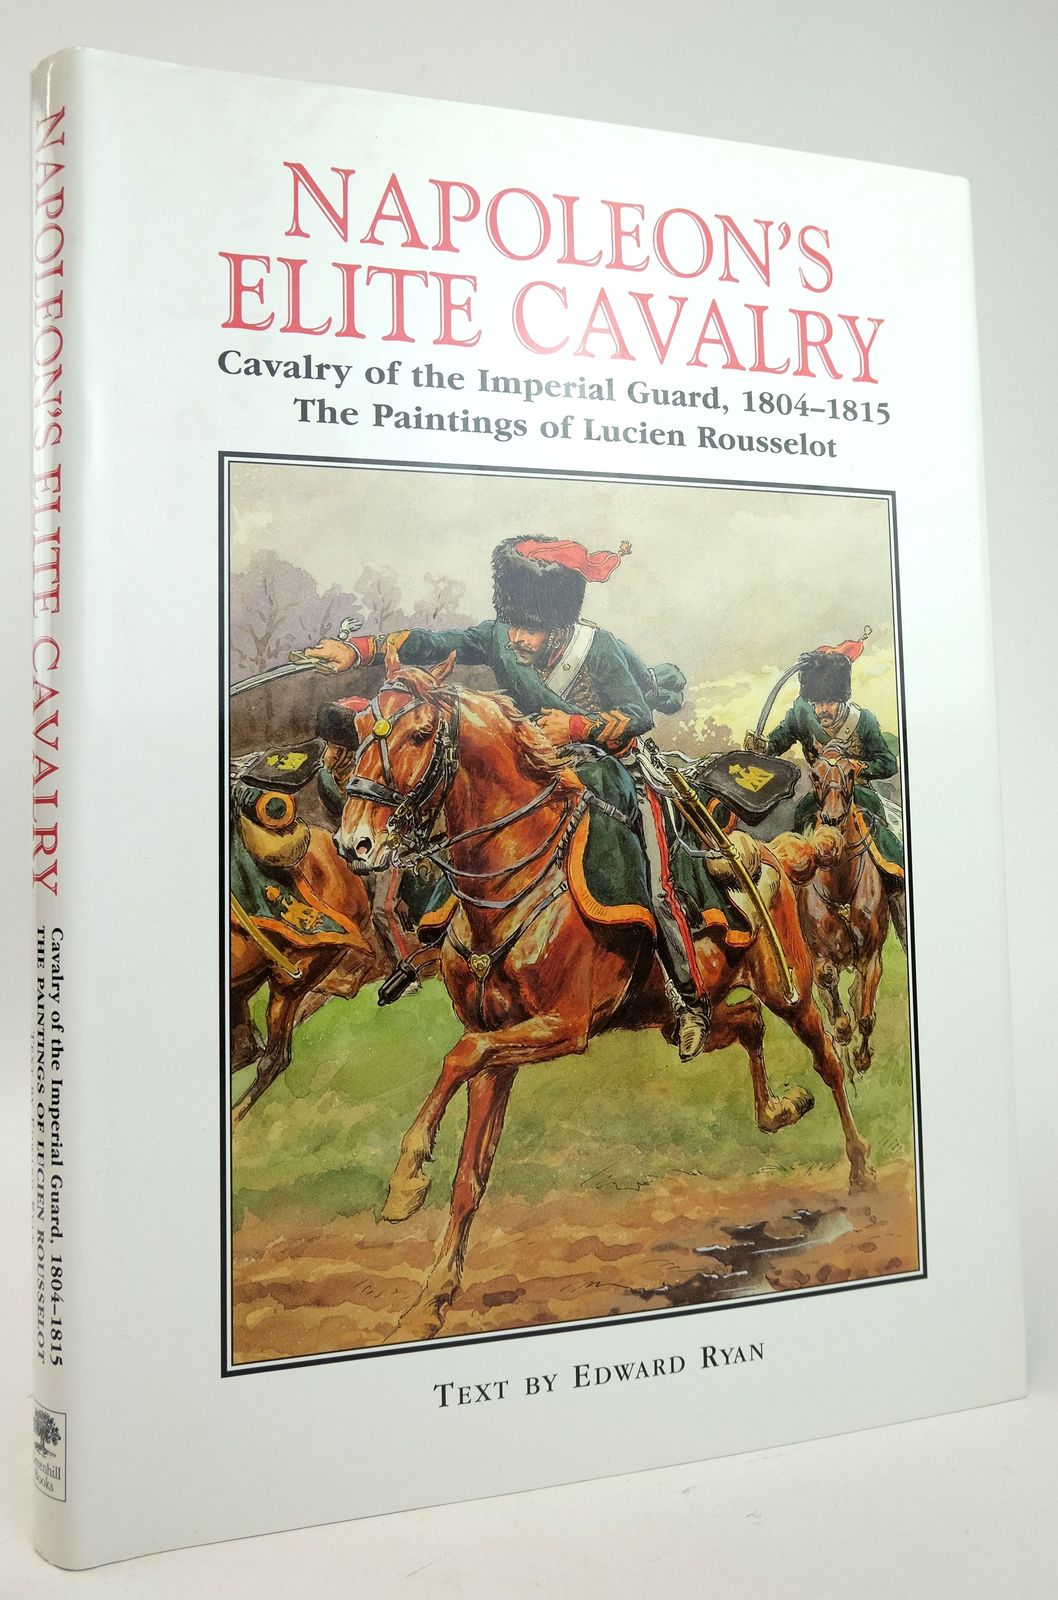 Photo of NAPOLEON'S ELITE CAVALRY written by Ryan, Edward illustrated by Rousselot, Lucien published by Greenhill Books, Stackpole Books (STOCK CODE: 1819985)  for sale by Stella & Rose's Books